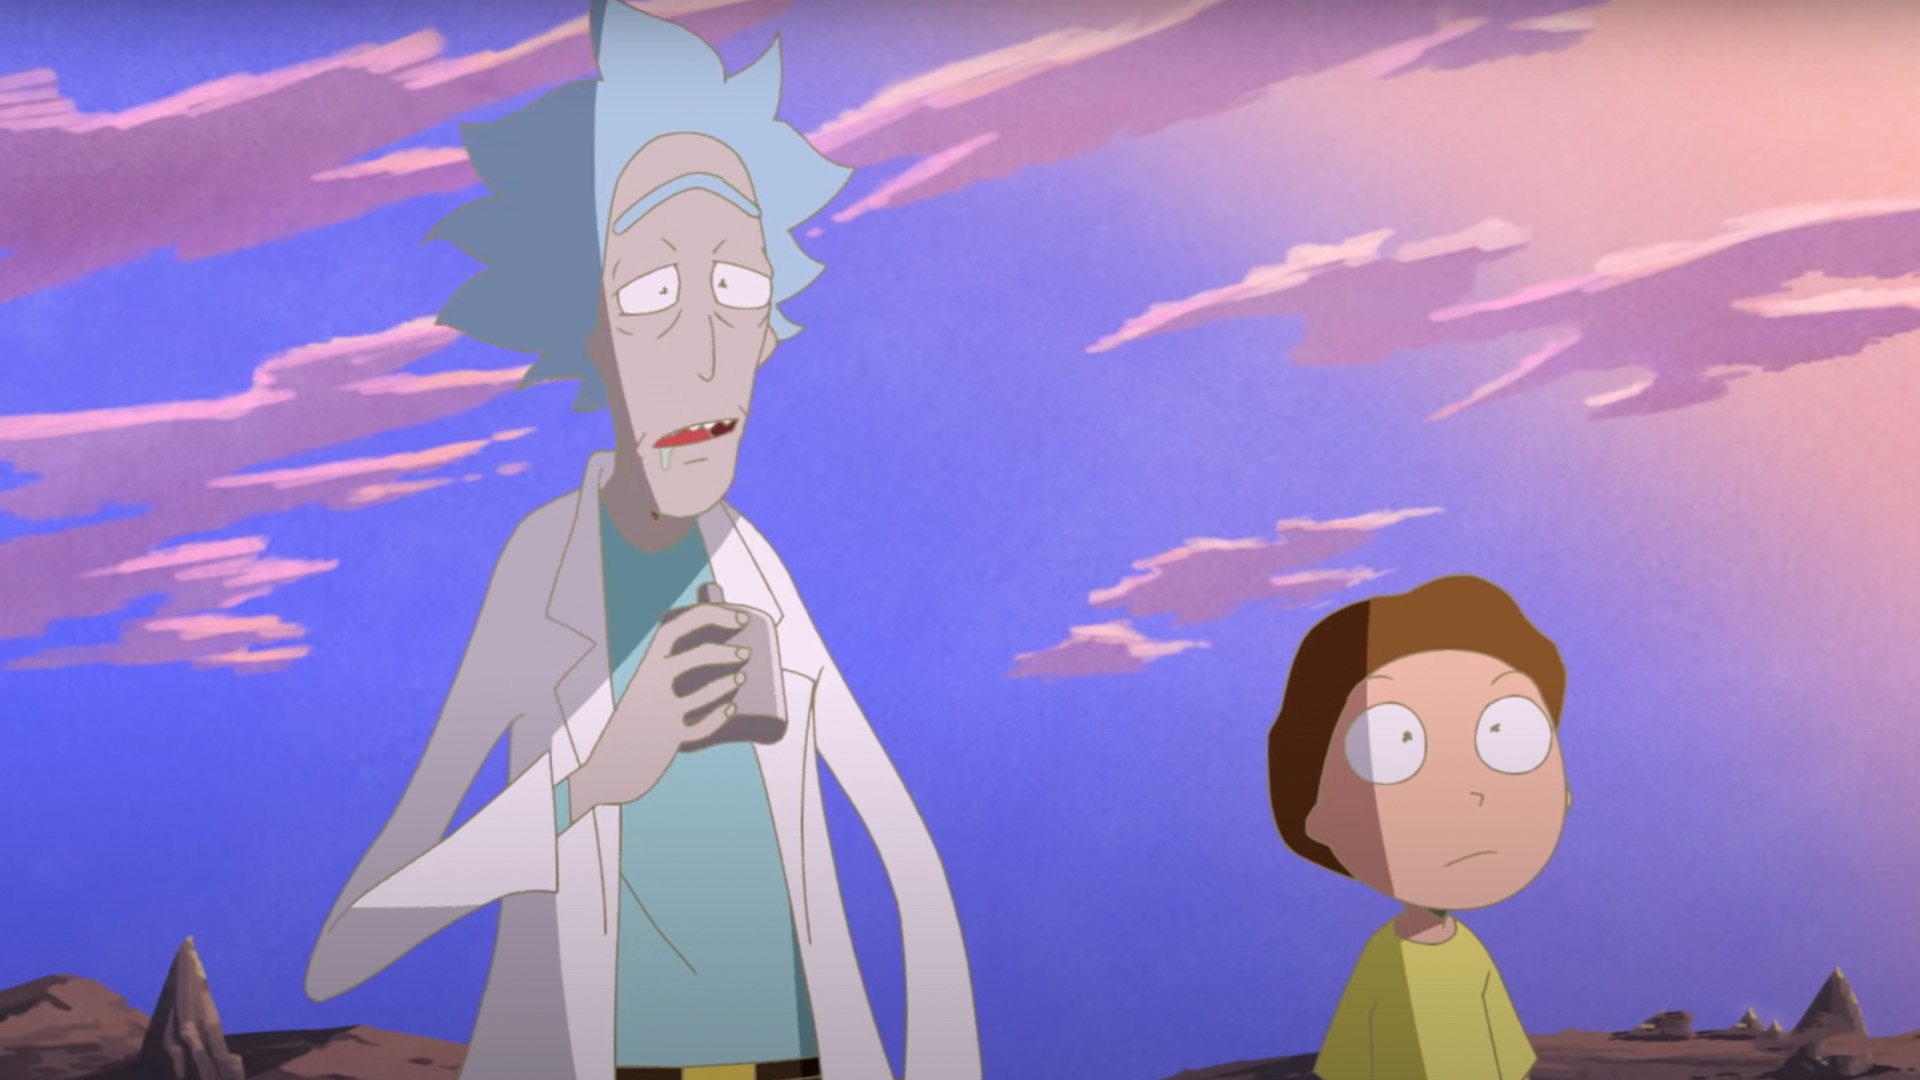 The 25 best Rick and Morty episodes